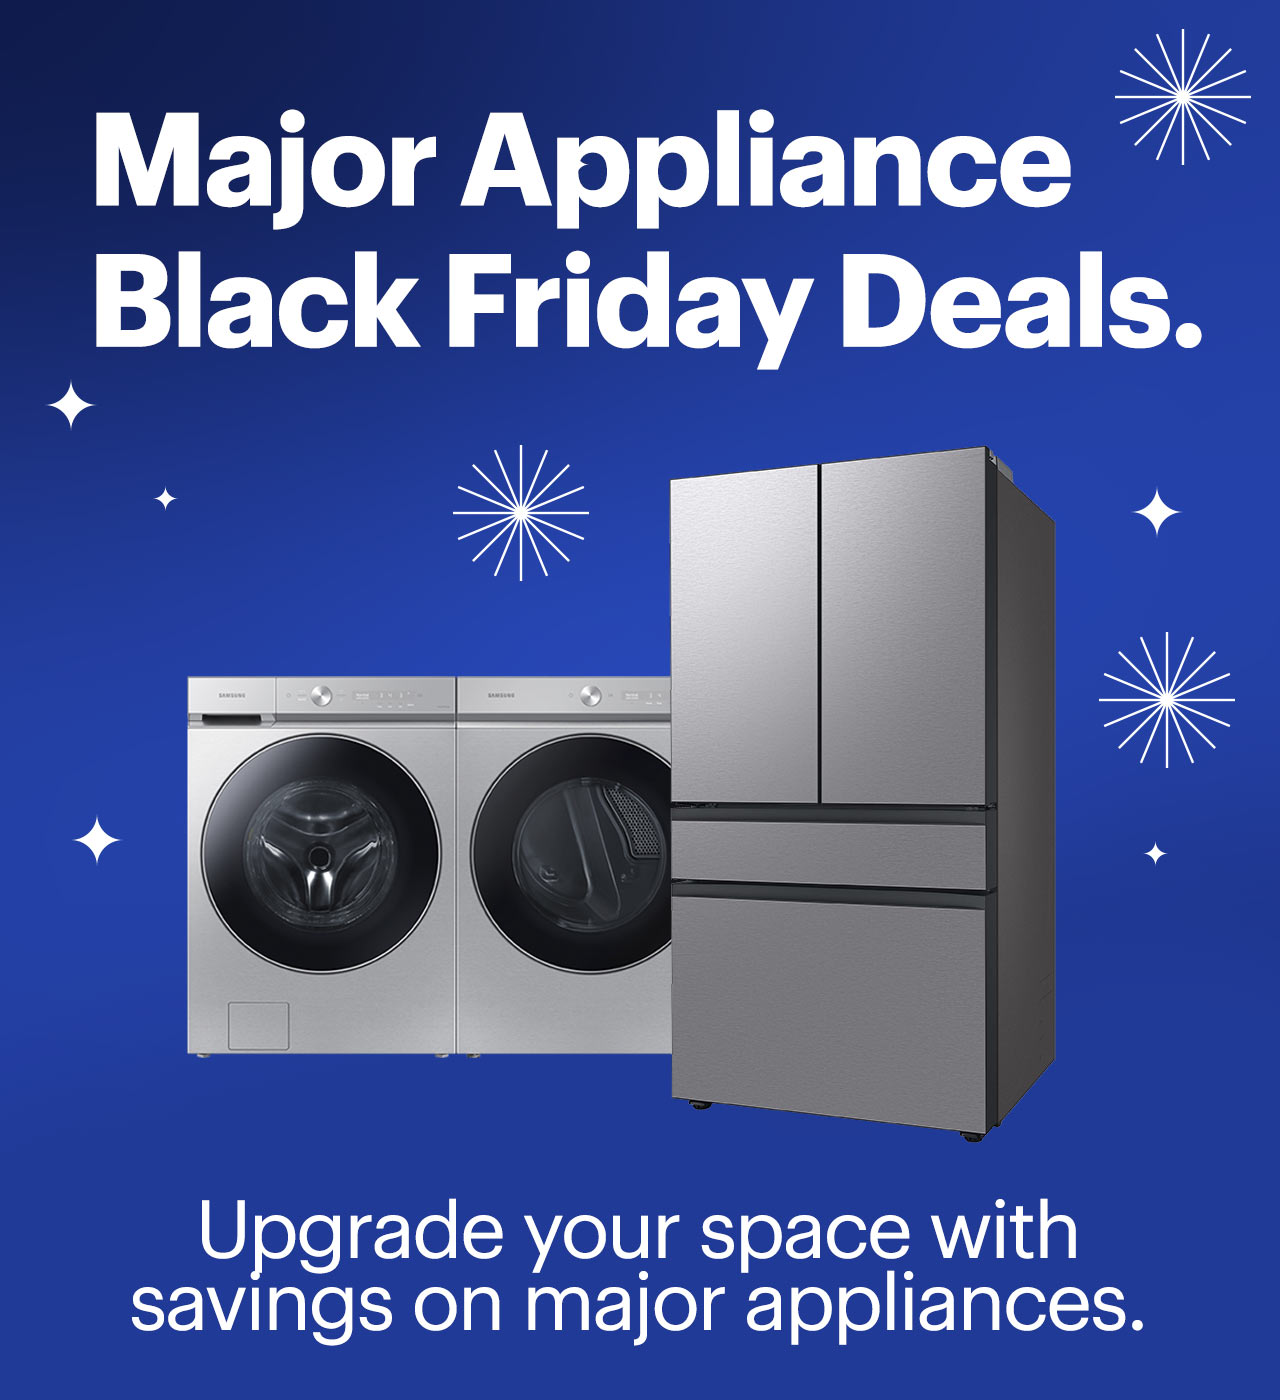 Major Appliance Black Friday Deals. Upgrade your space with savings on major appliances.